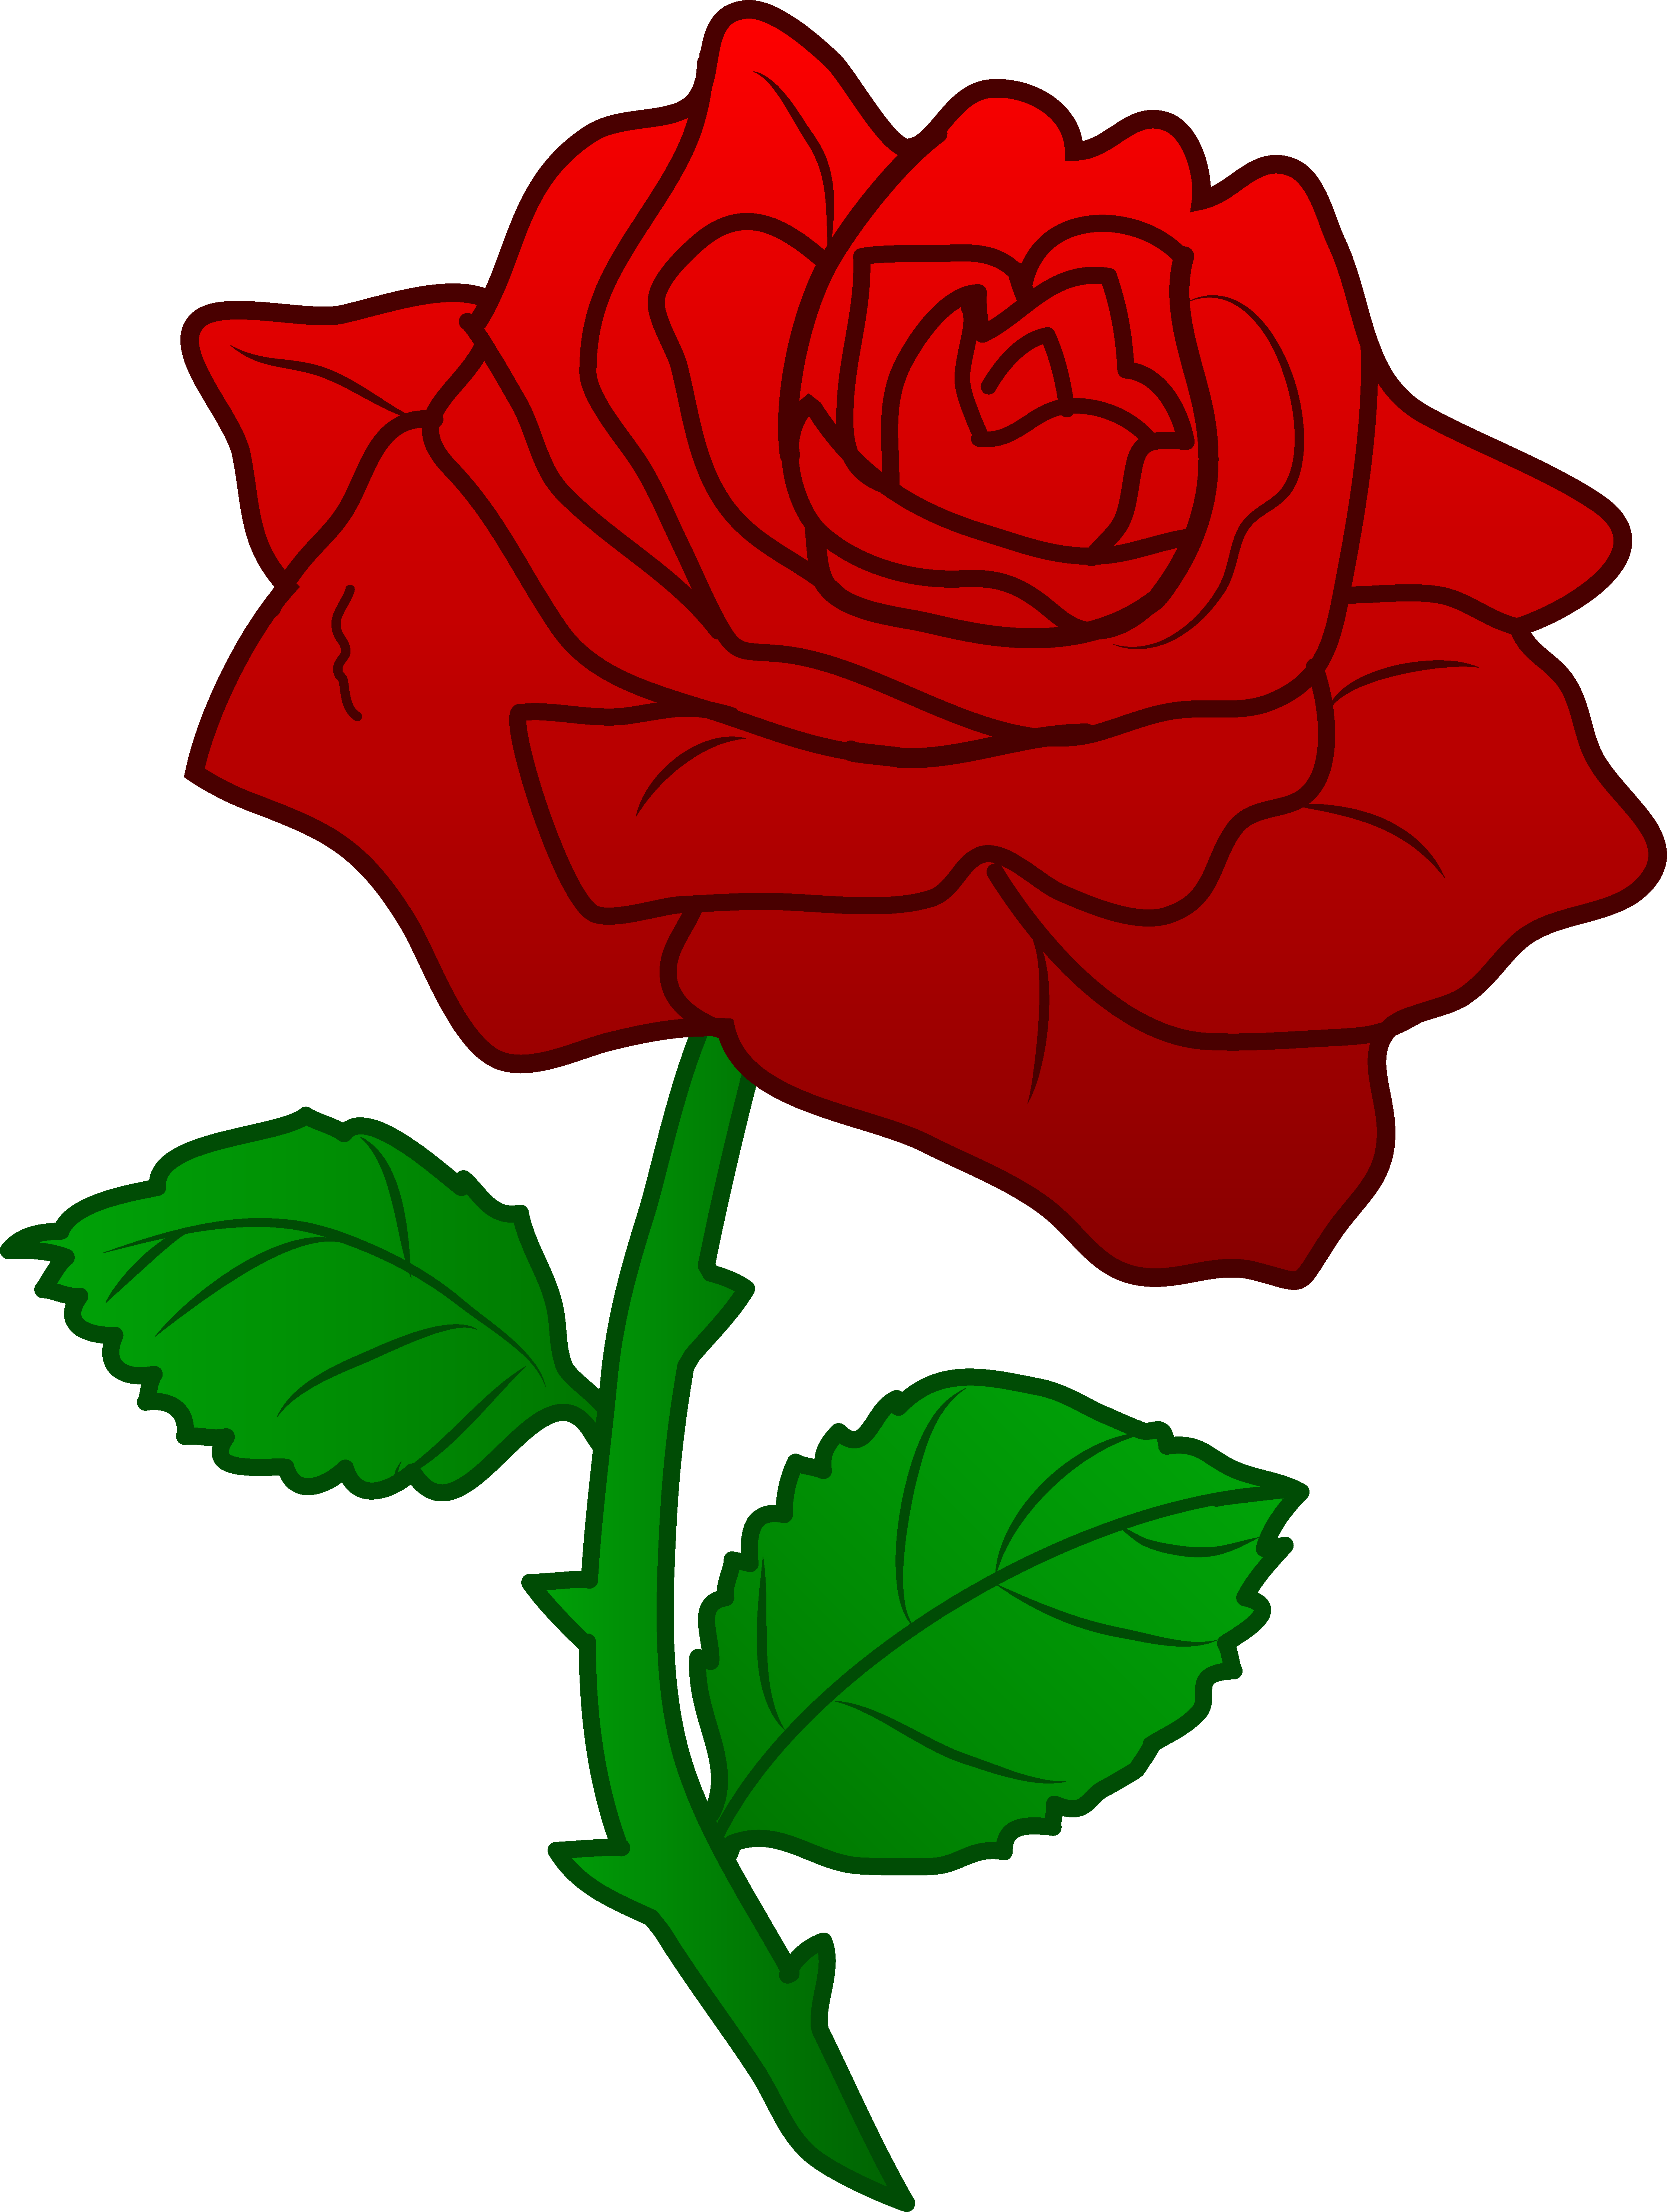 Red roses clip art images fre